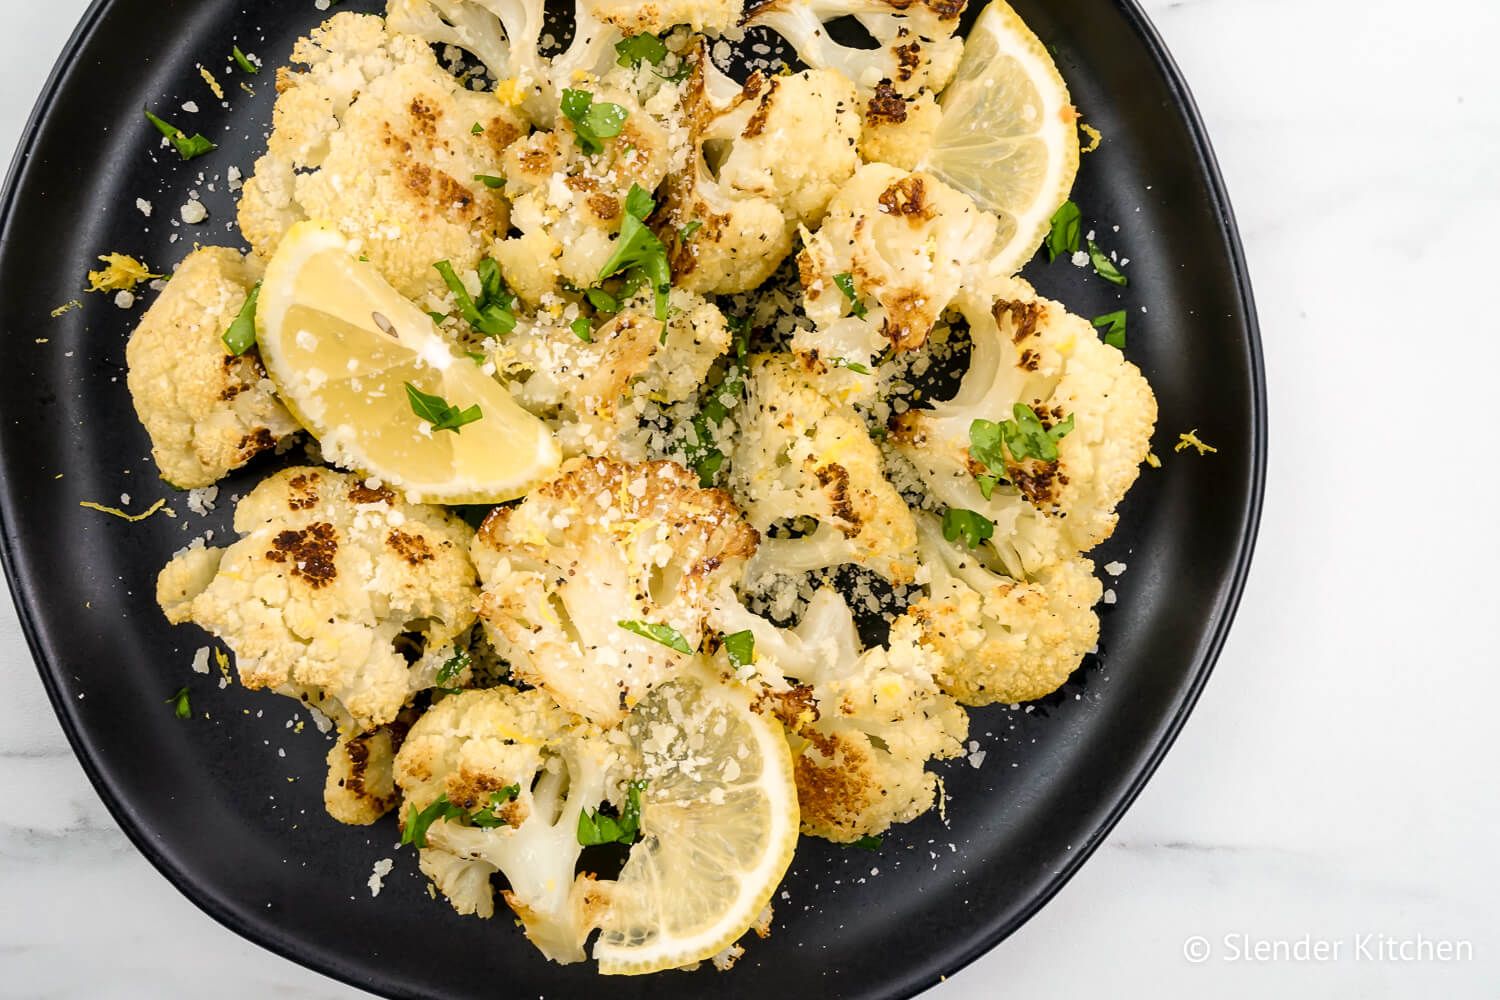 Lemon garlic roasted cauliflower with Parmesan cheese and lemon slices on a black plate.